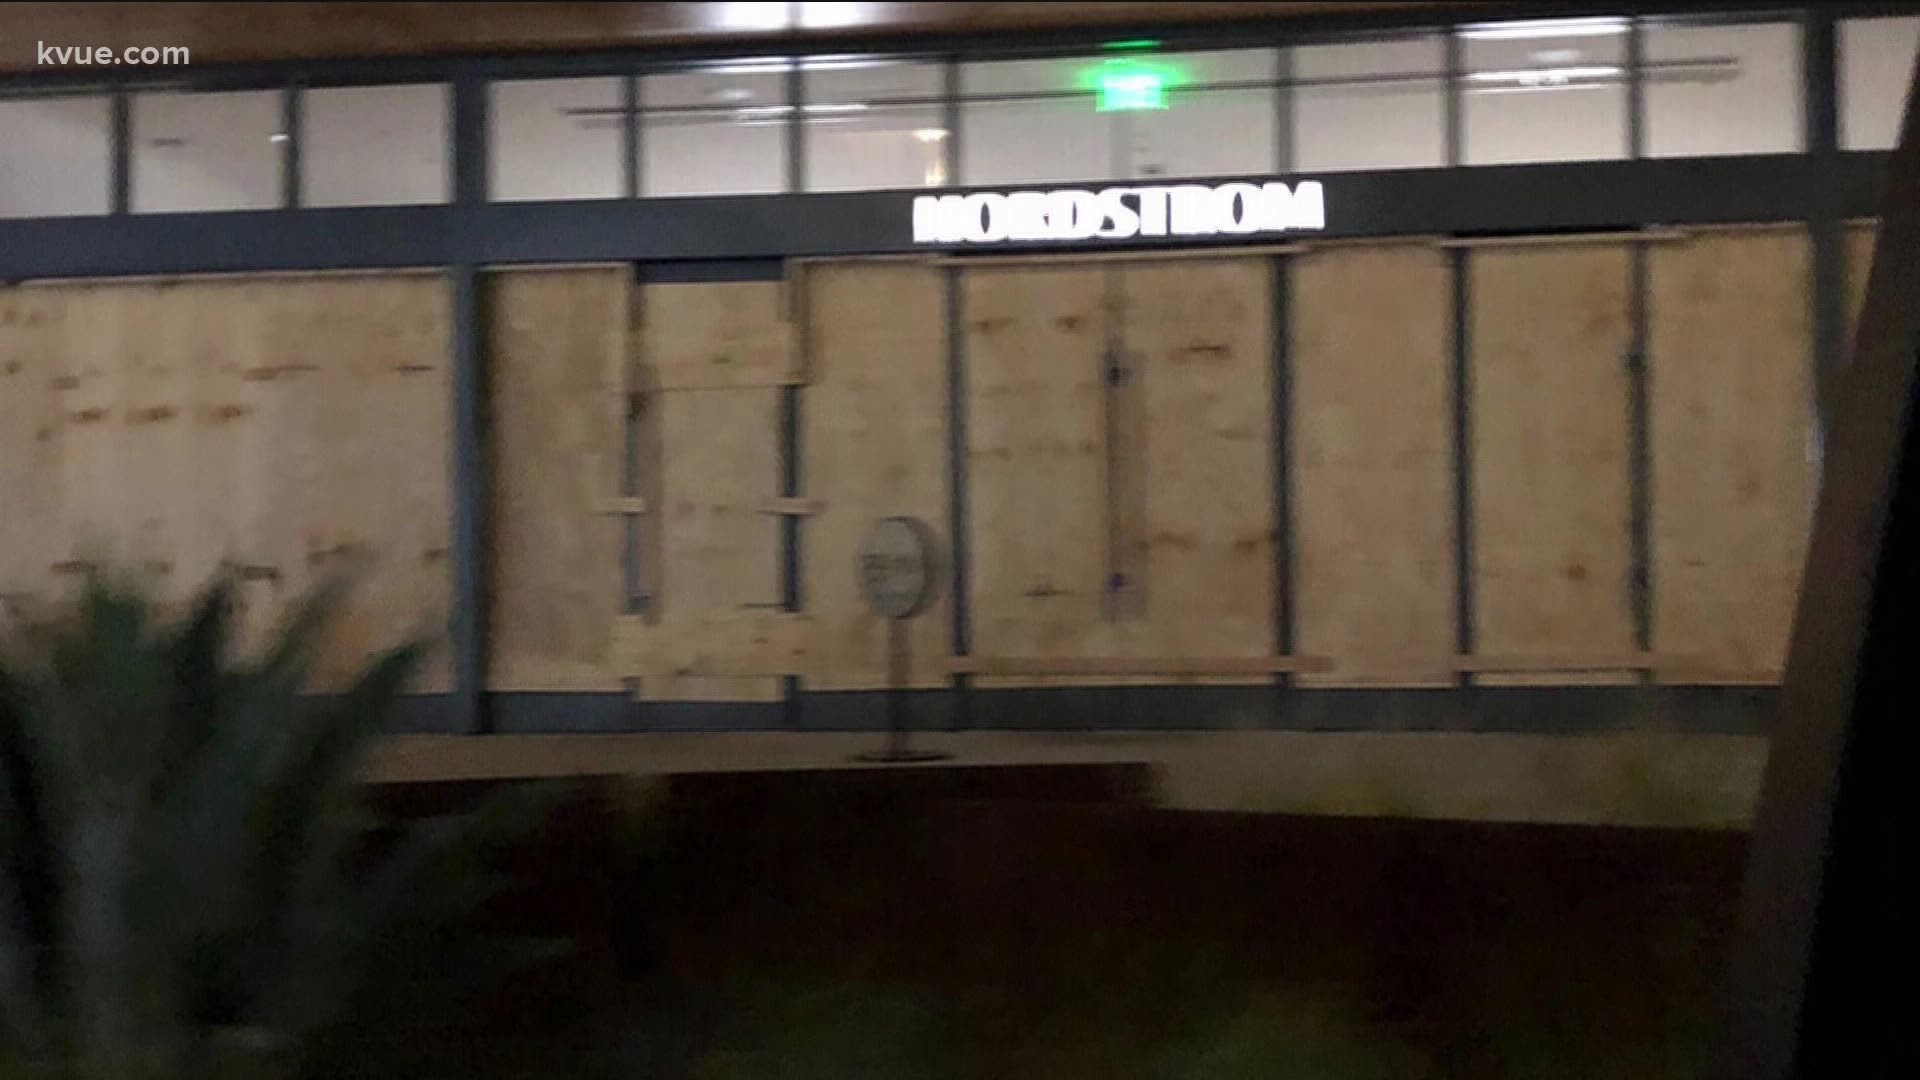 The Nordstrom at the Domain is boarding up to prevent people from stealing after many Austin businesses were broken into amid the protests.